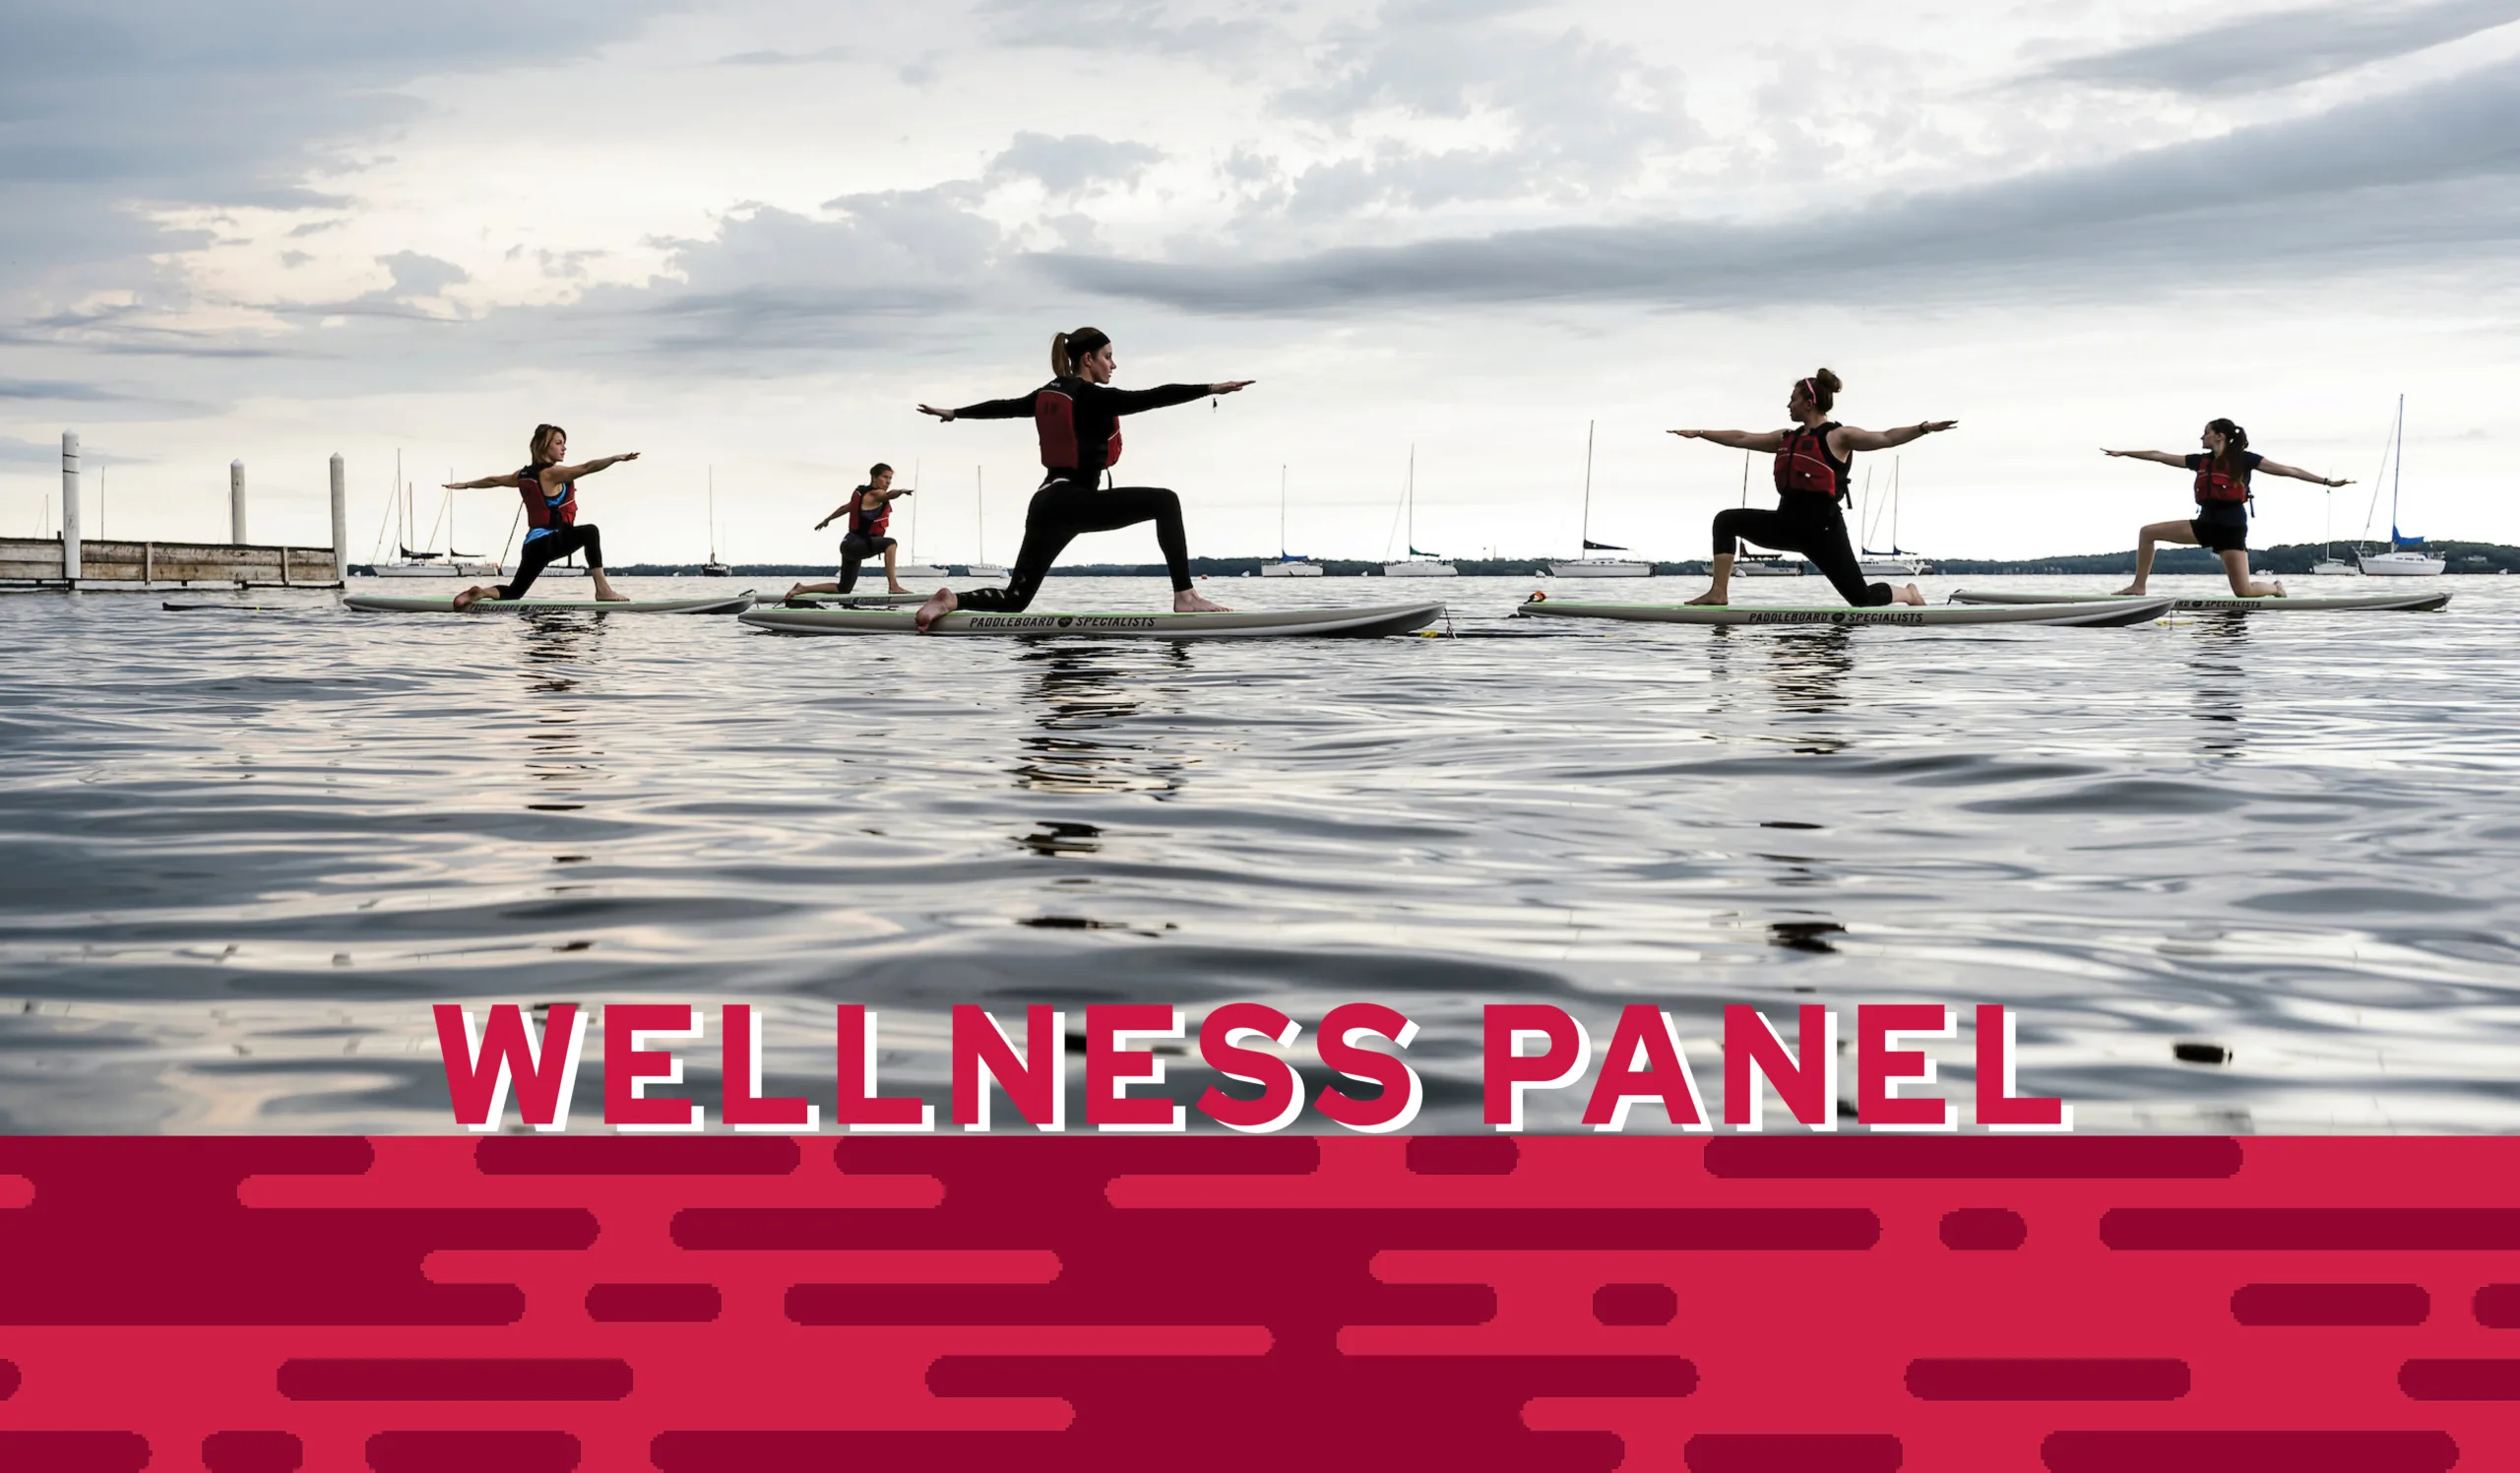 People in yoga poses on paddle boards on a lake